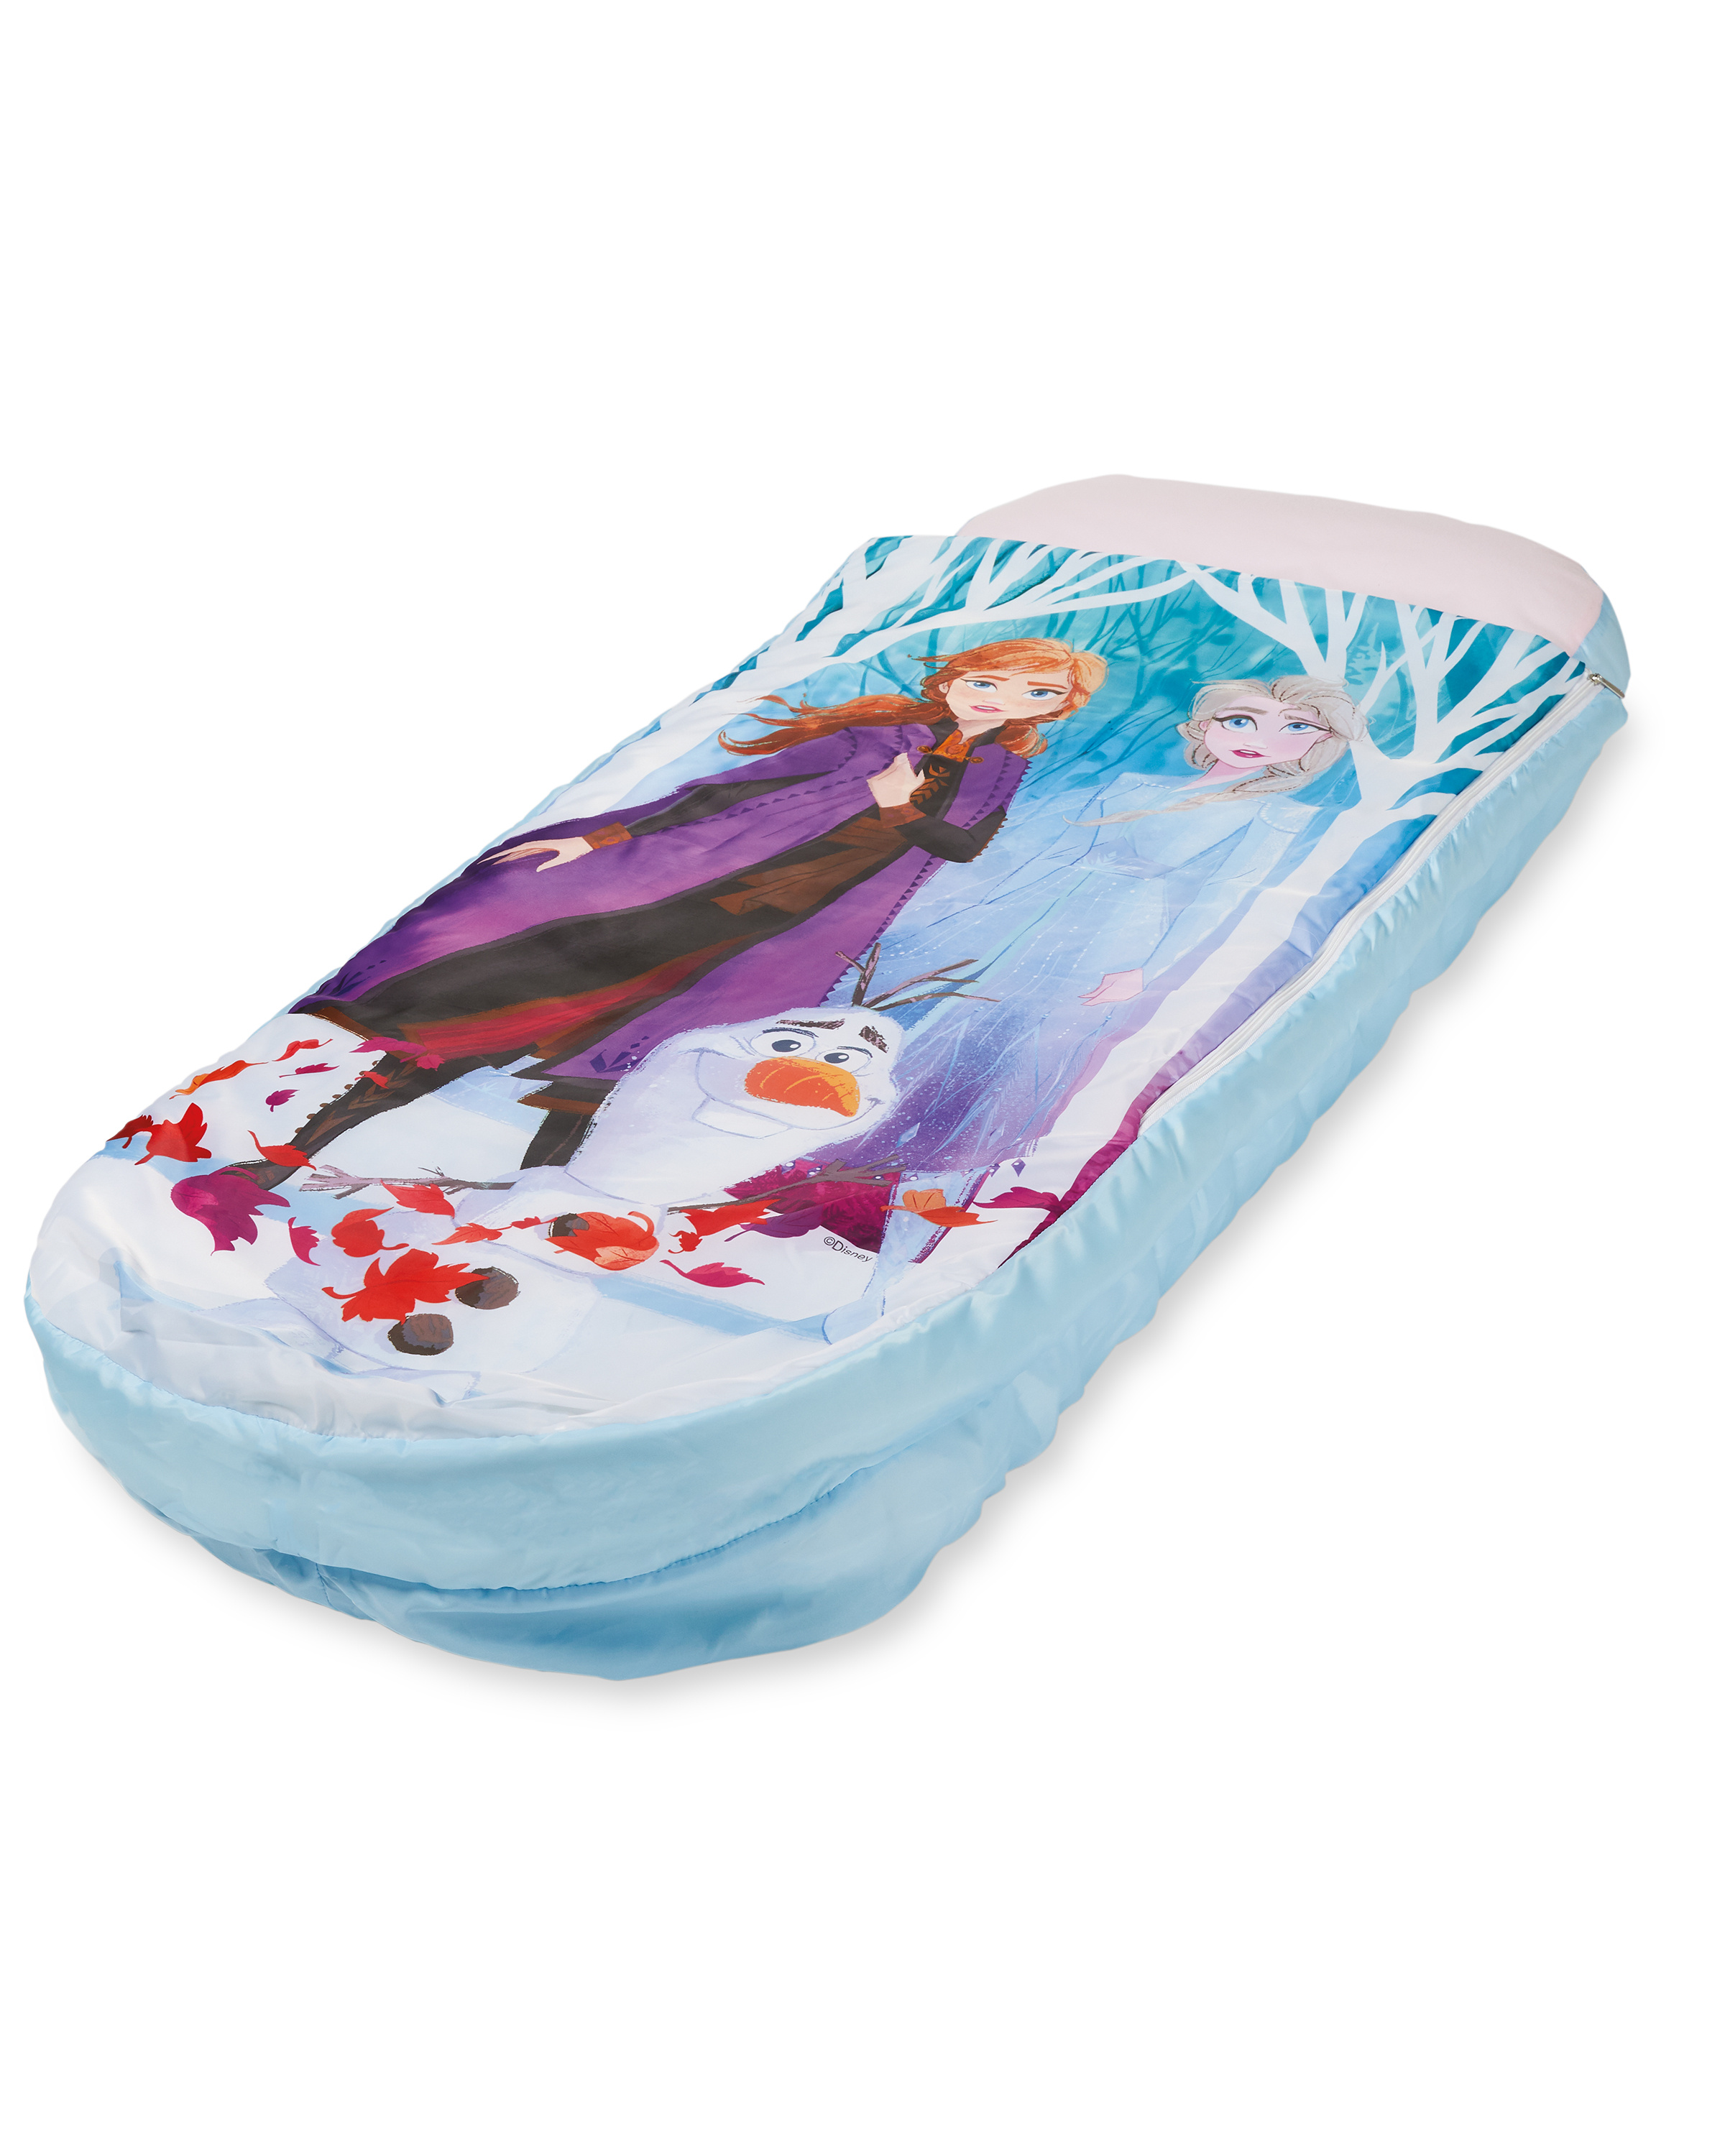 Disney Frozen Junior ReadyBed-2 in 1 Kids Sleeping Inflatable air Bed in a  Bag